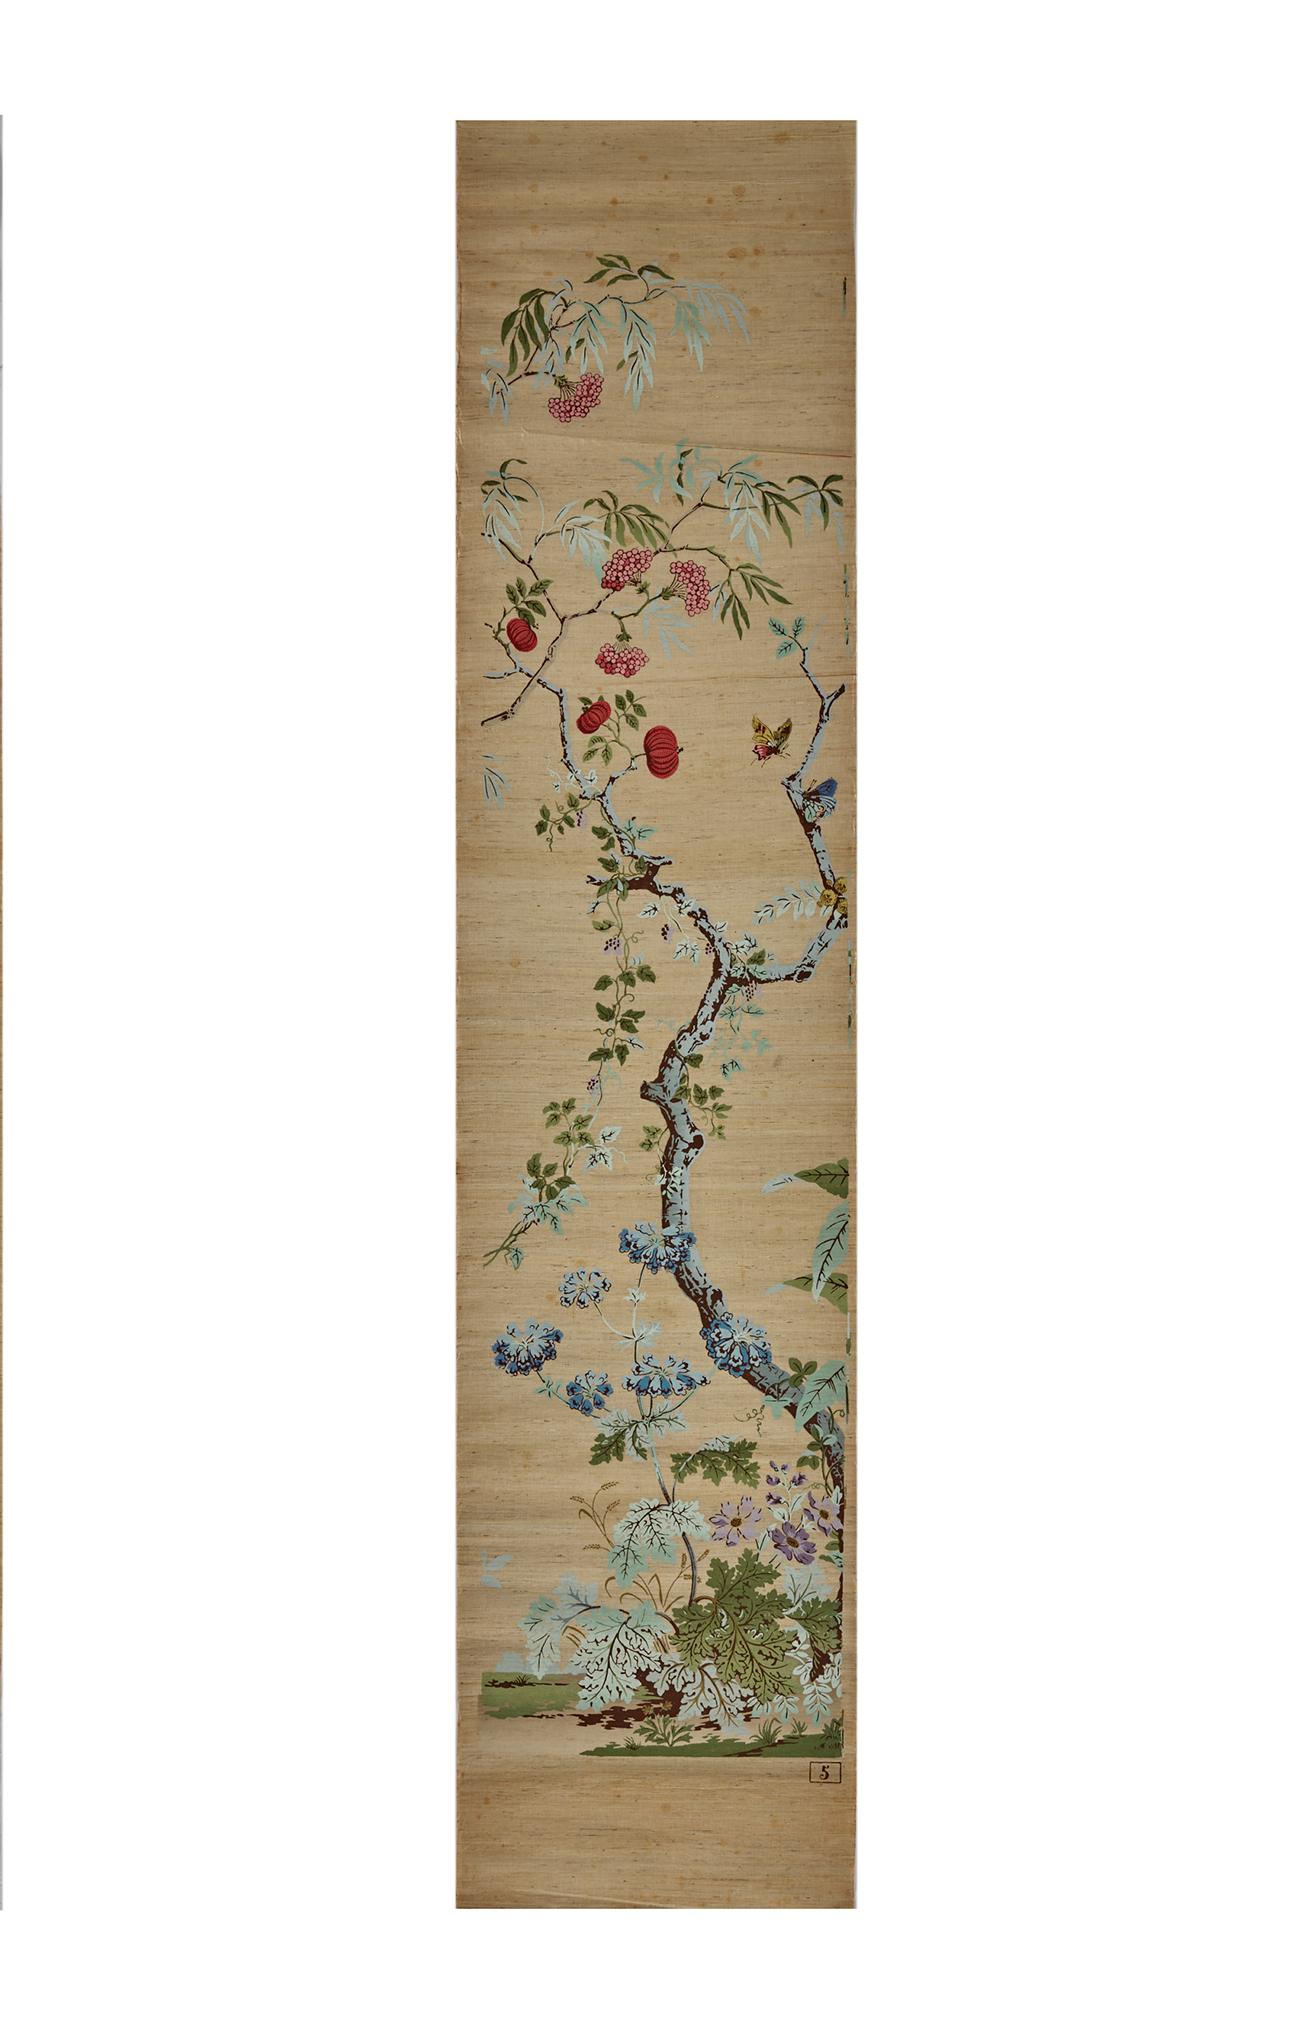 Zuber, 'Decor Chinois' Hand Wood Blocked on Grasscloth Scenic Wallpaper For Sale 1